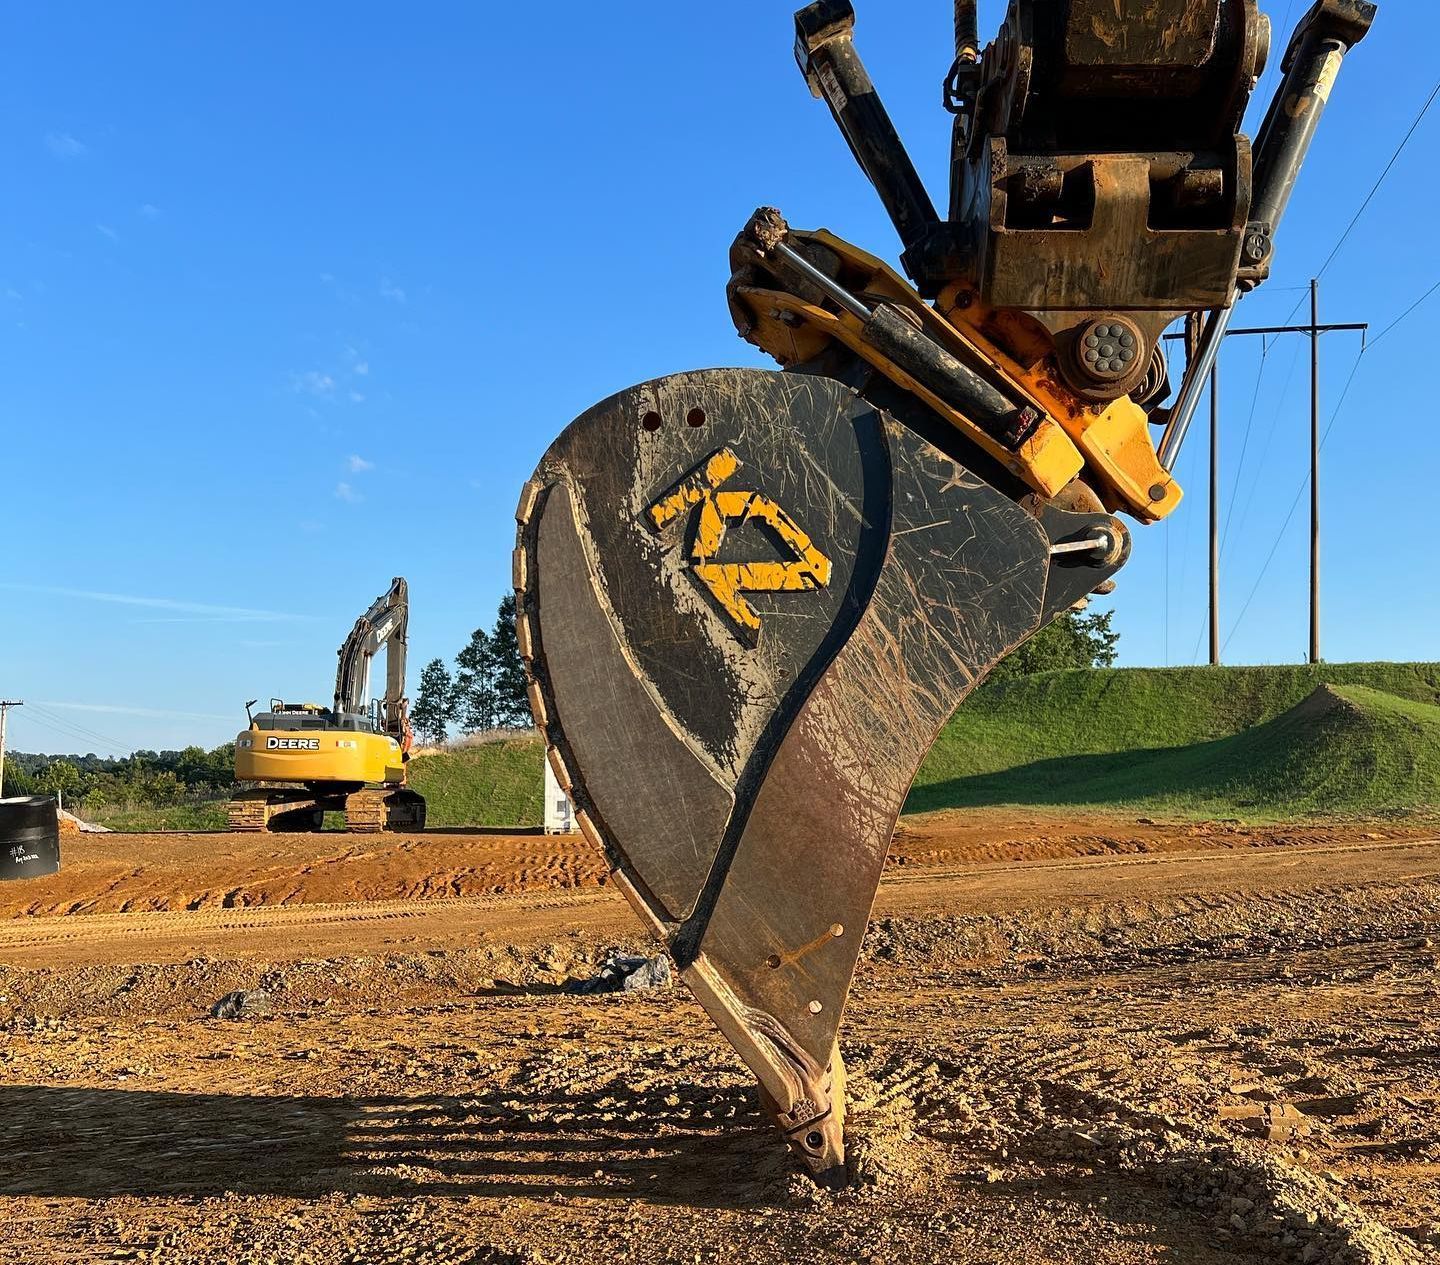 KZ Construction Excavator Scoop with the KZ Logo image on the side